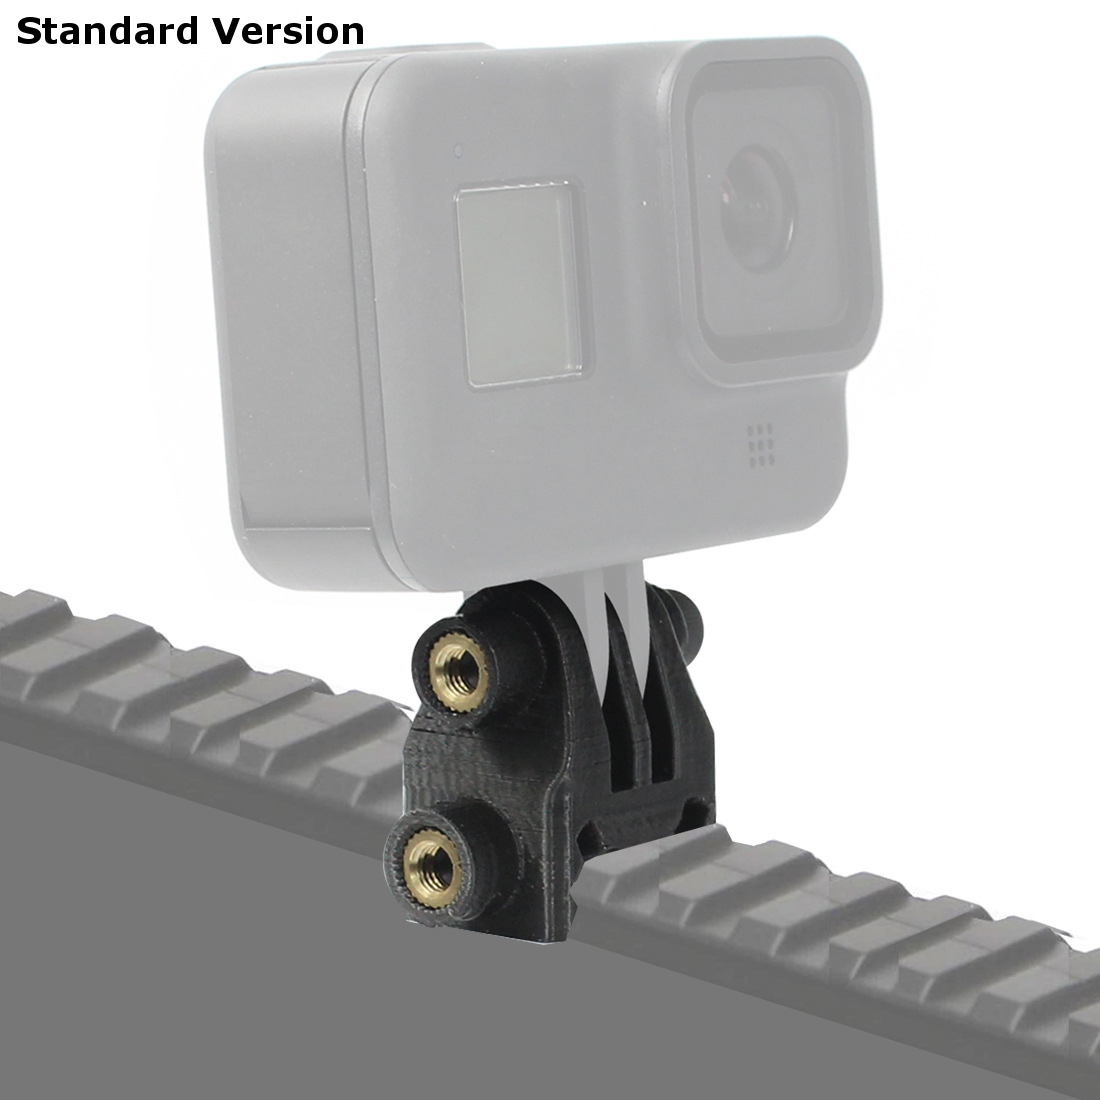 For GOPRO/EKEN Action Camera Mount Guide Lead Rail Adapter Slide Way Clamp Holder Cold Shoe Base 3D Printed for FPV Drone Gimbal - Photo: 2